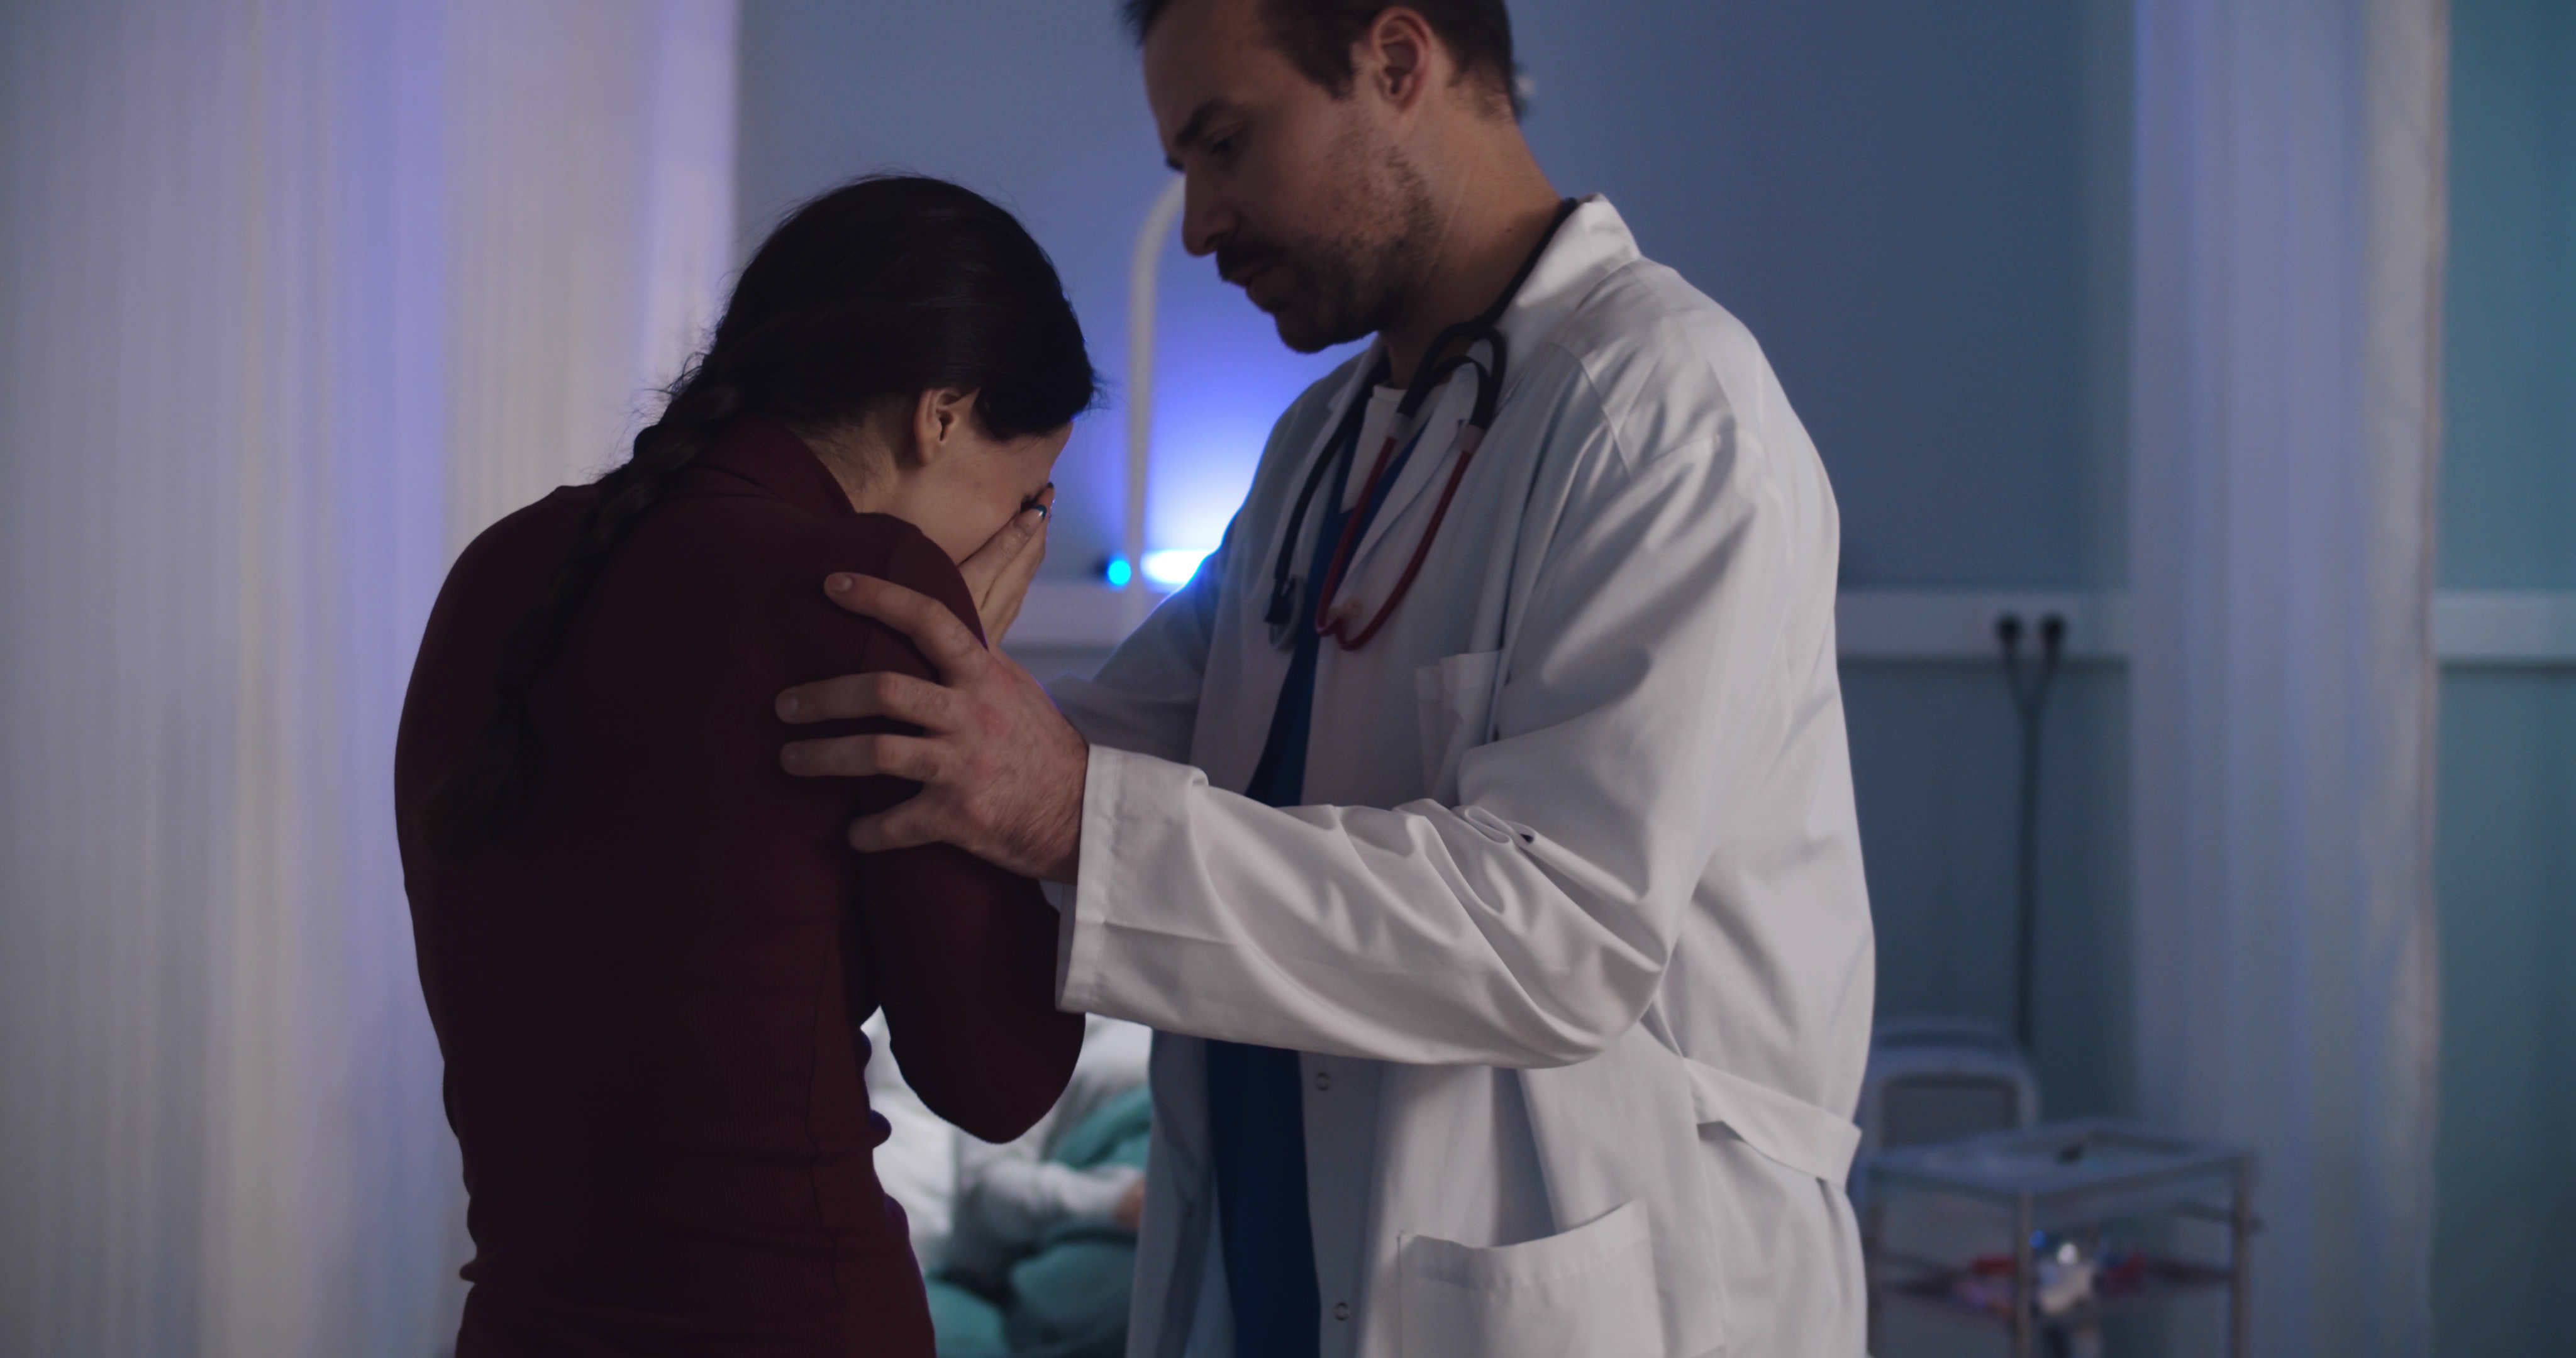 Doctor comforting crying woman | Source: Shutterstock